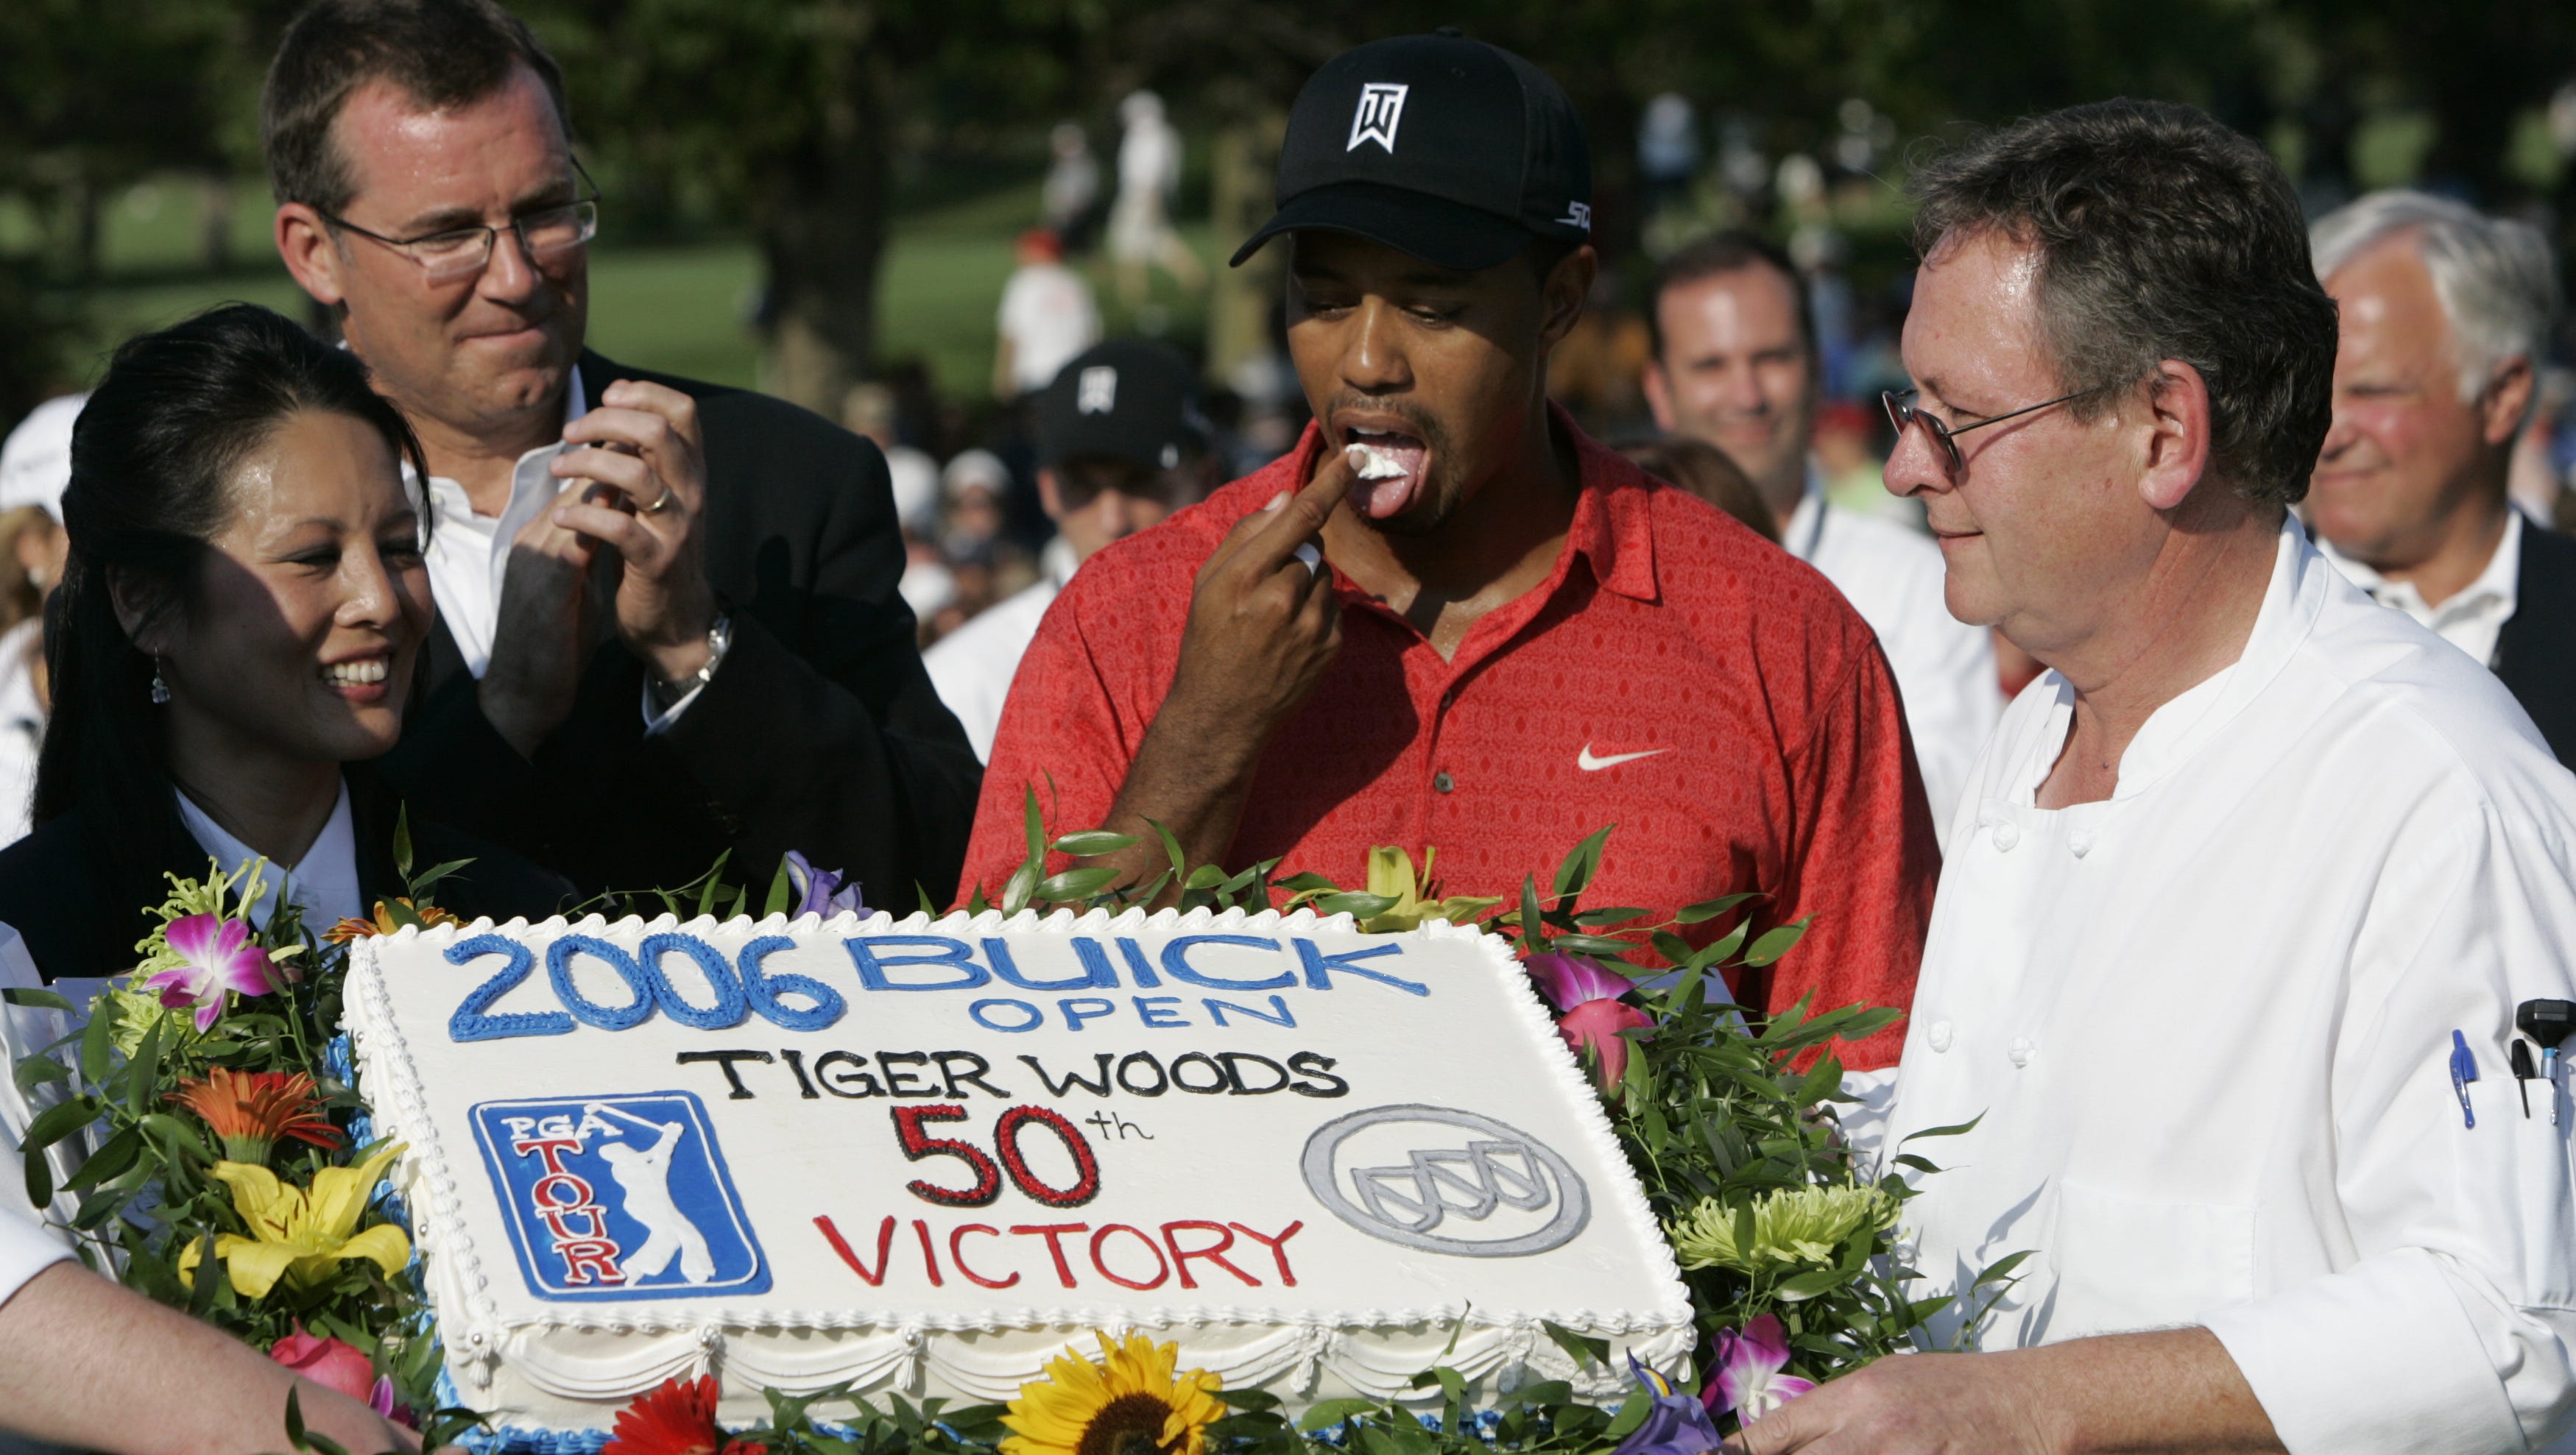 Tiger Woods samples his cake in front of the crowd at the 2006 Buick Open following his 50th victory on the PGA Tour.